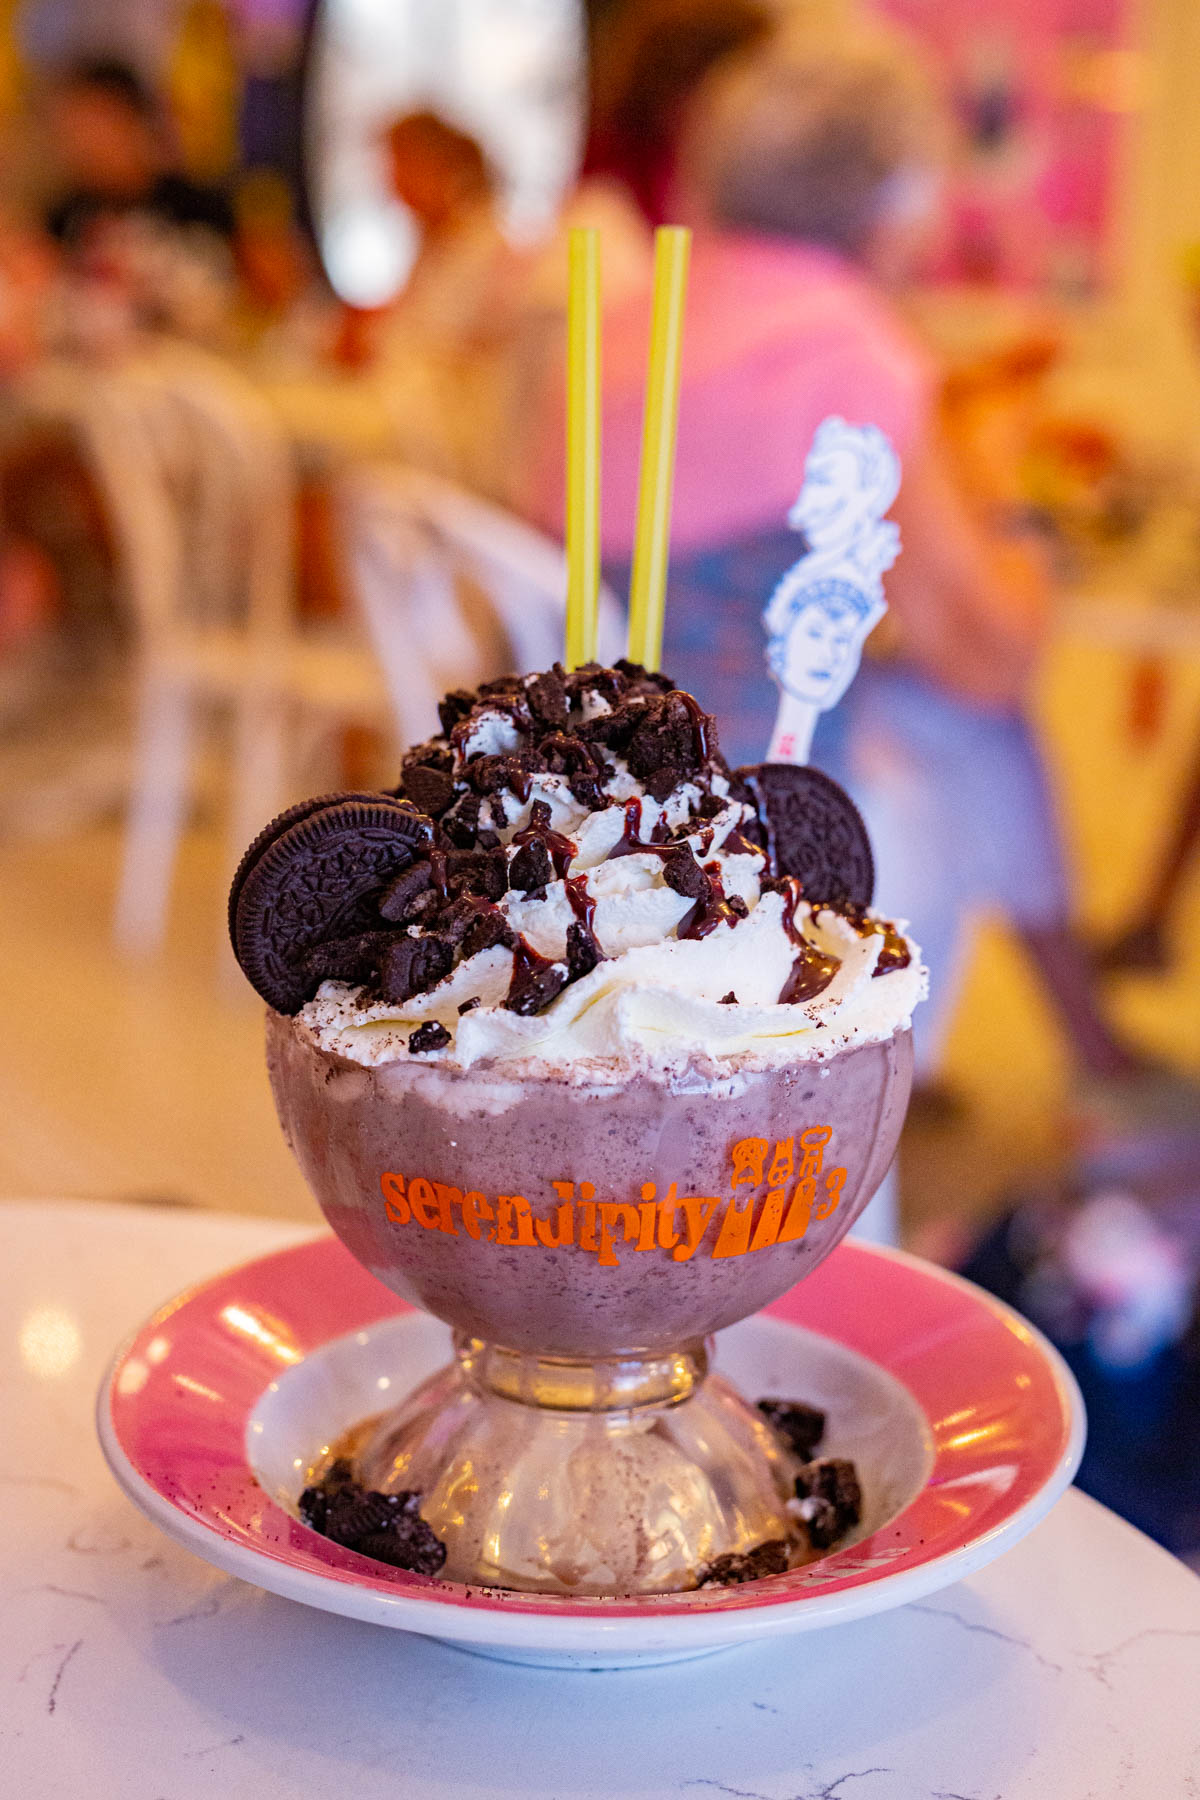 Serendipity 3 hot chocolate
Things to Do for Christmas in NYC with Kids